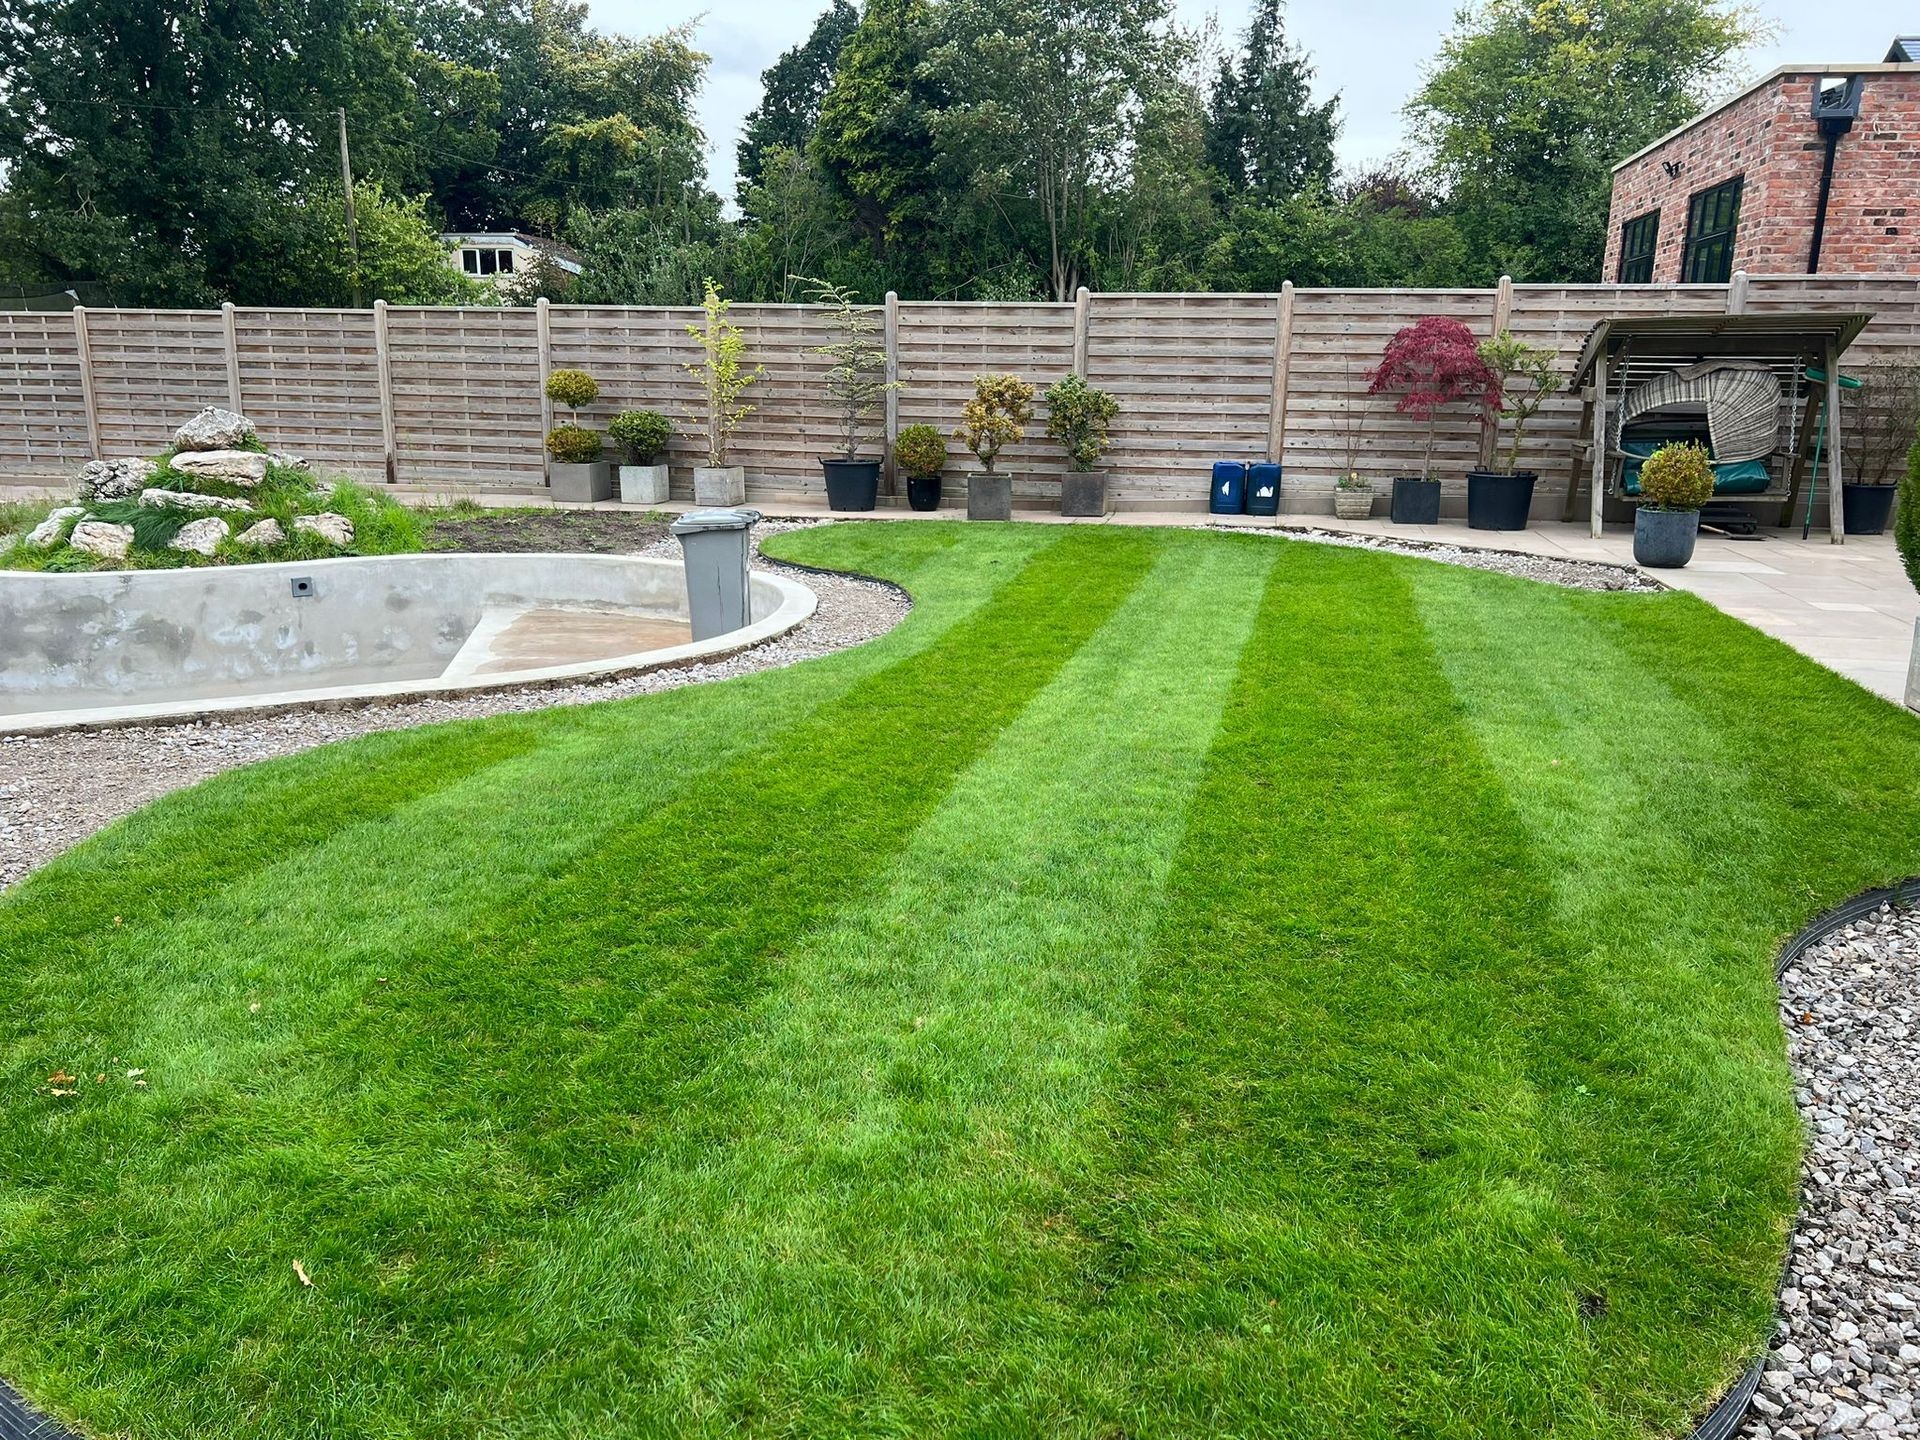 Turfing & Grass care